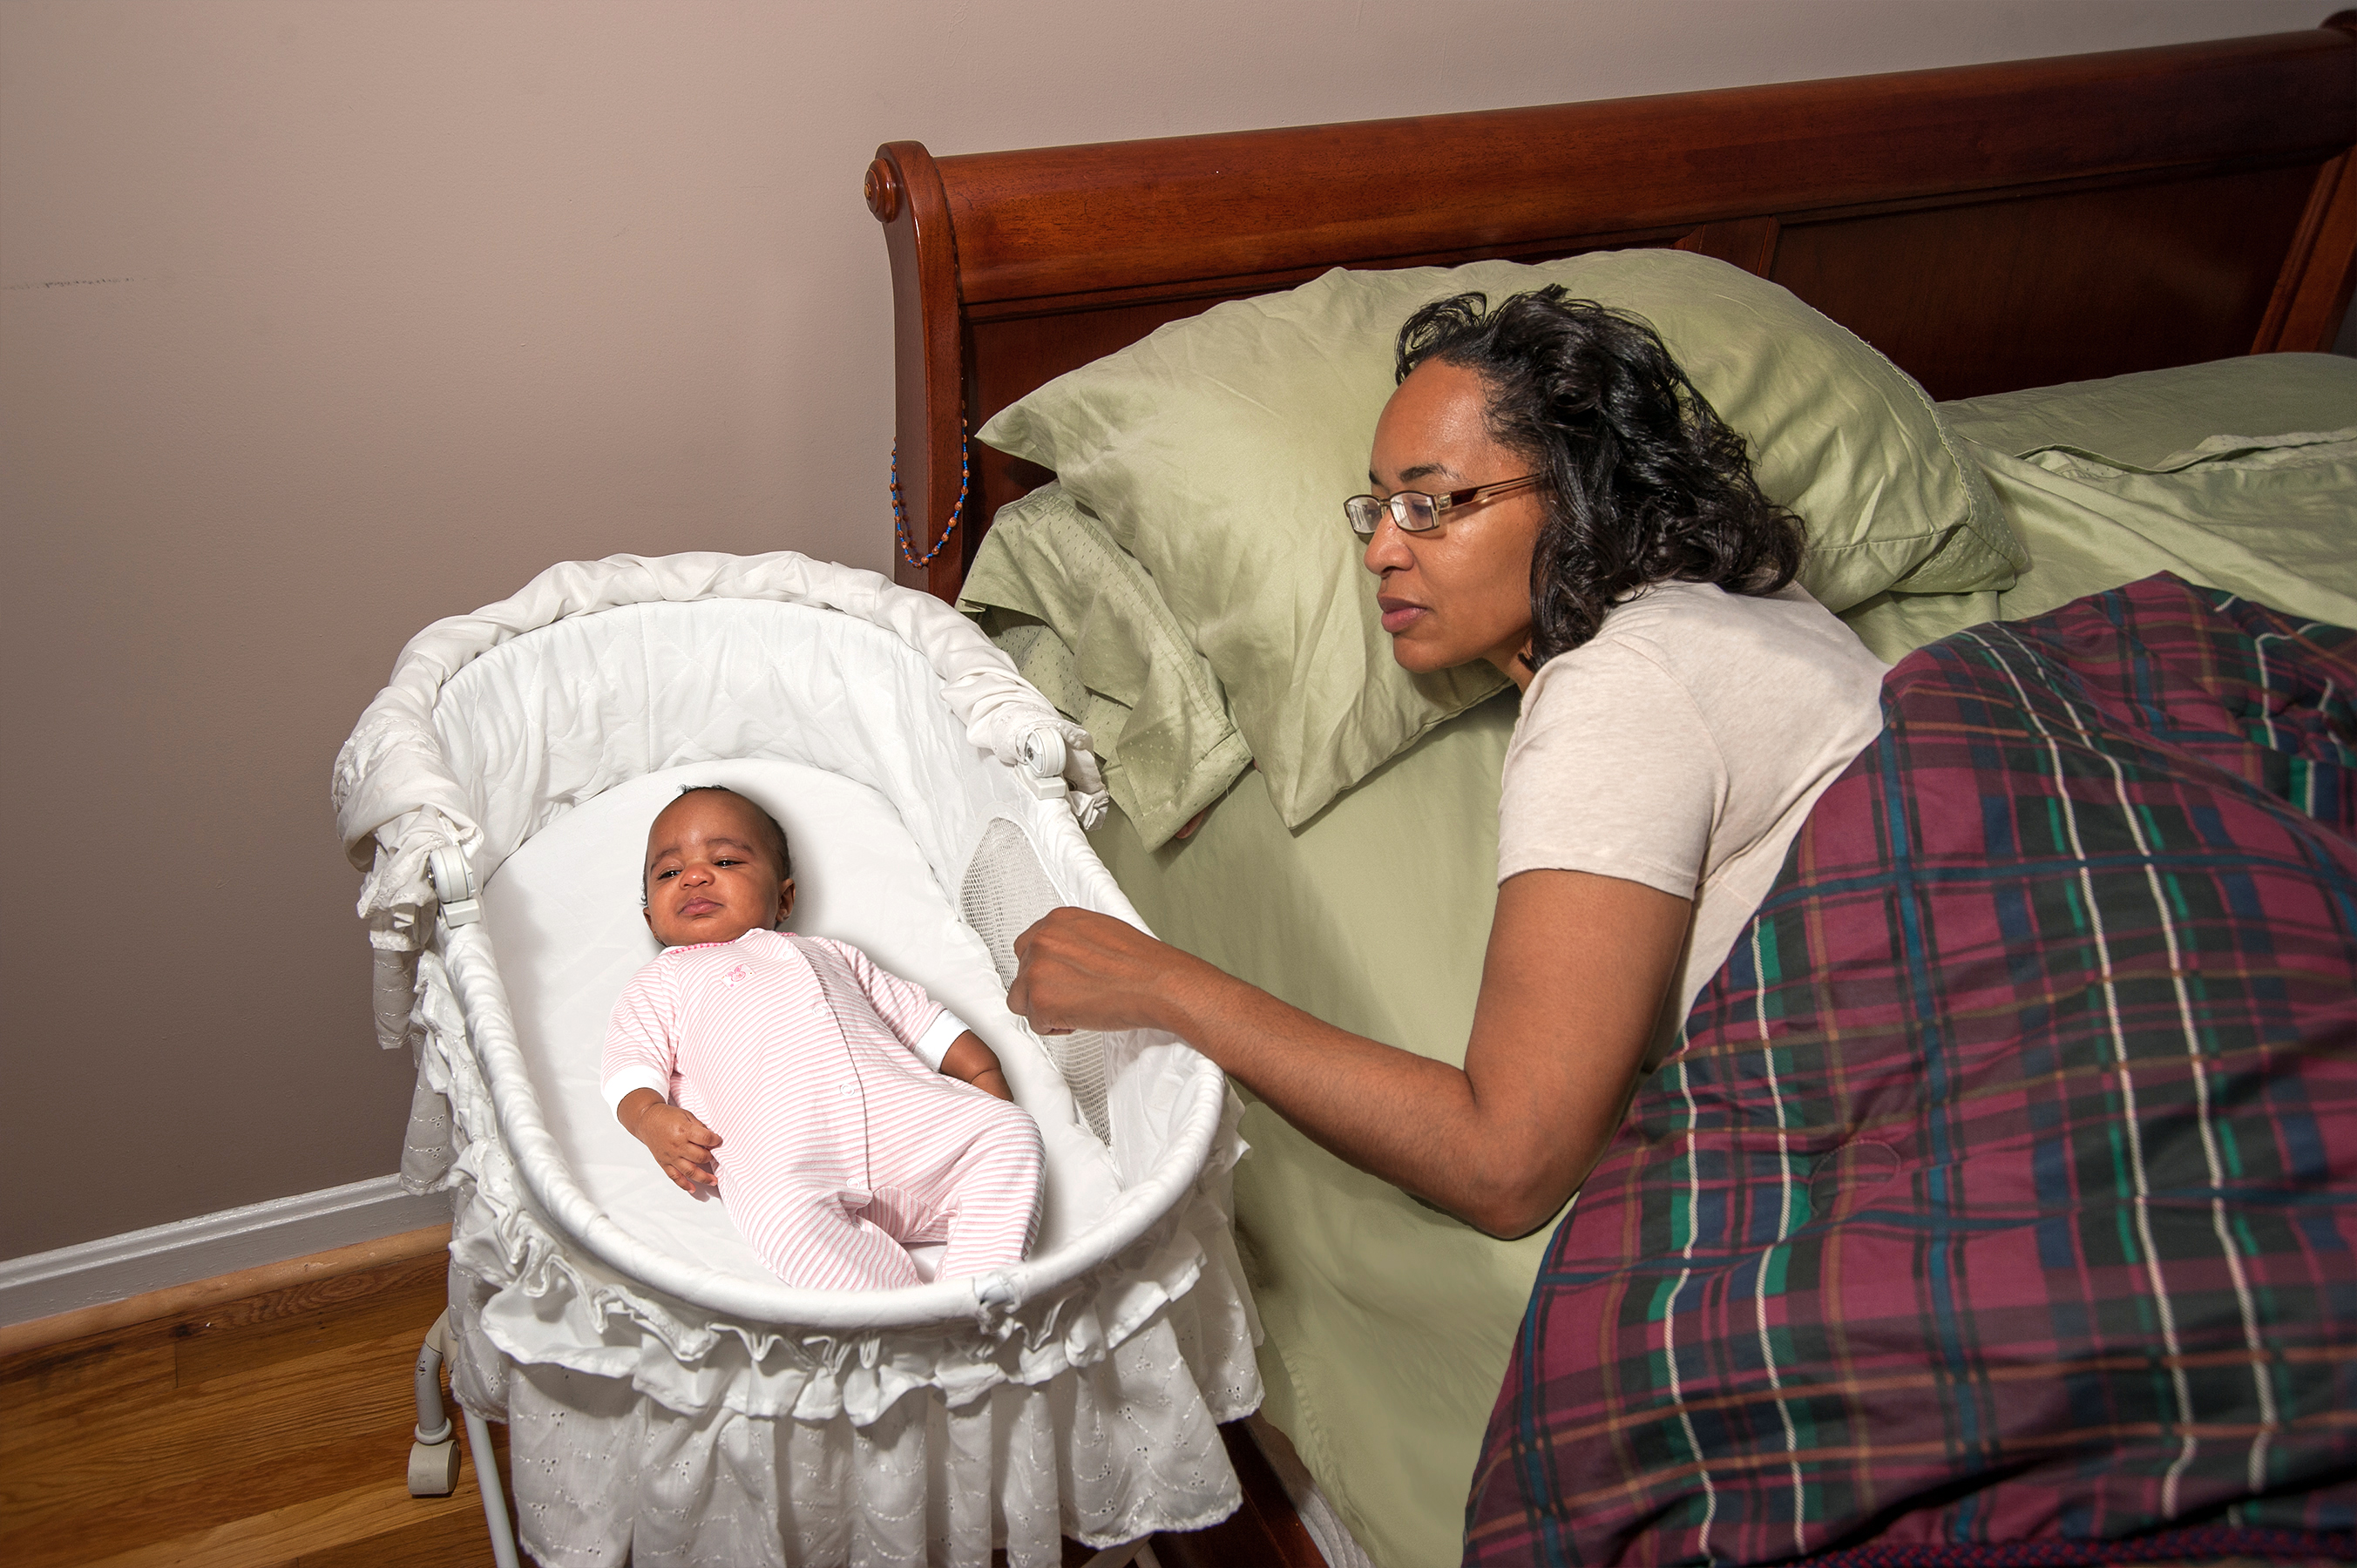 Room sharing: Mom in adult bed looks at on infant, who is sleeping in bassinet right next to the adult bed.